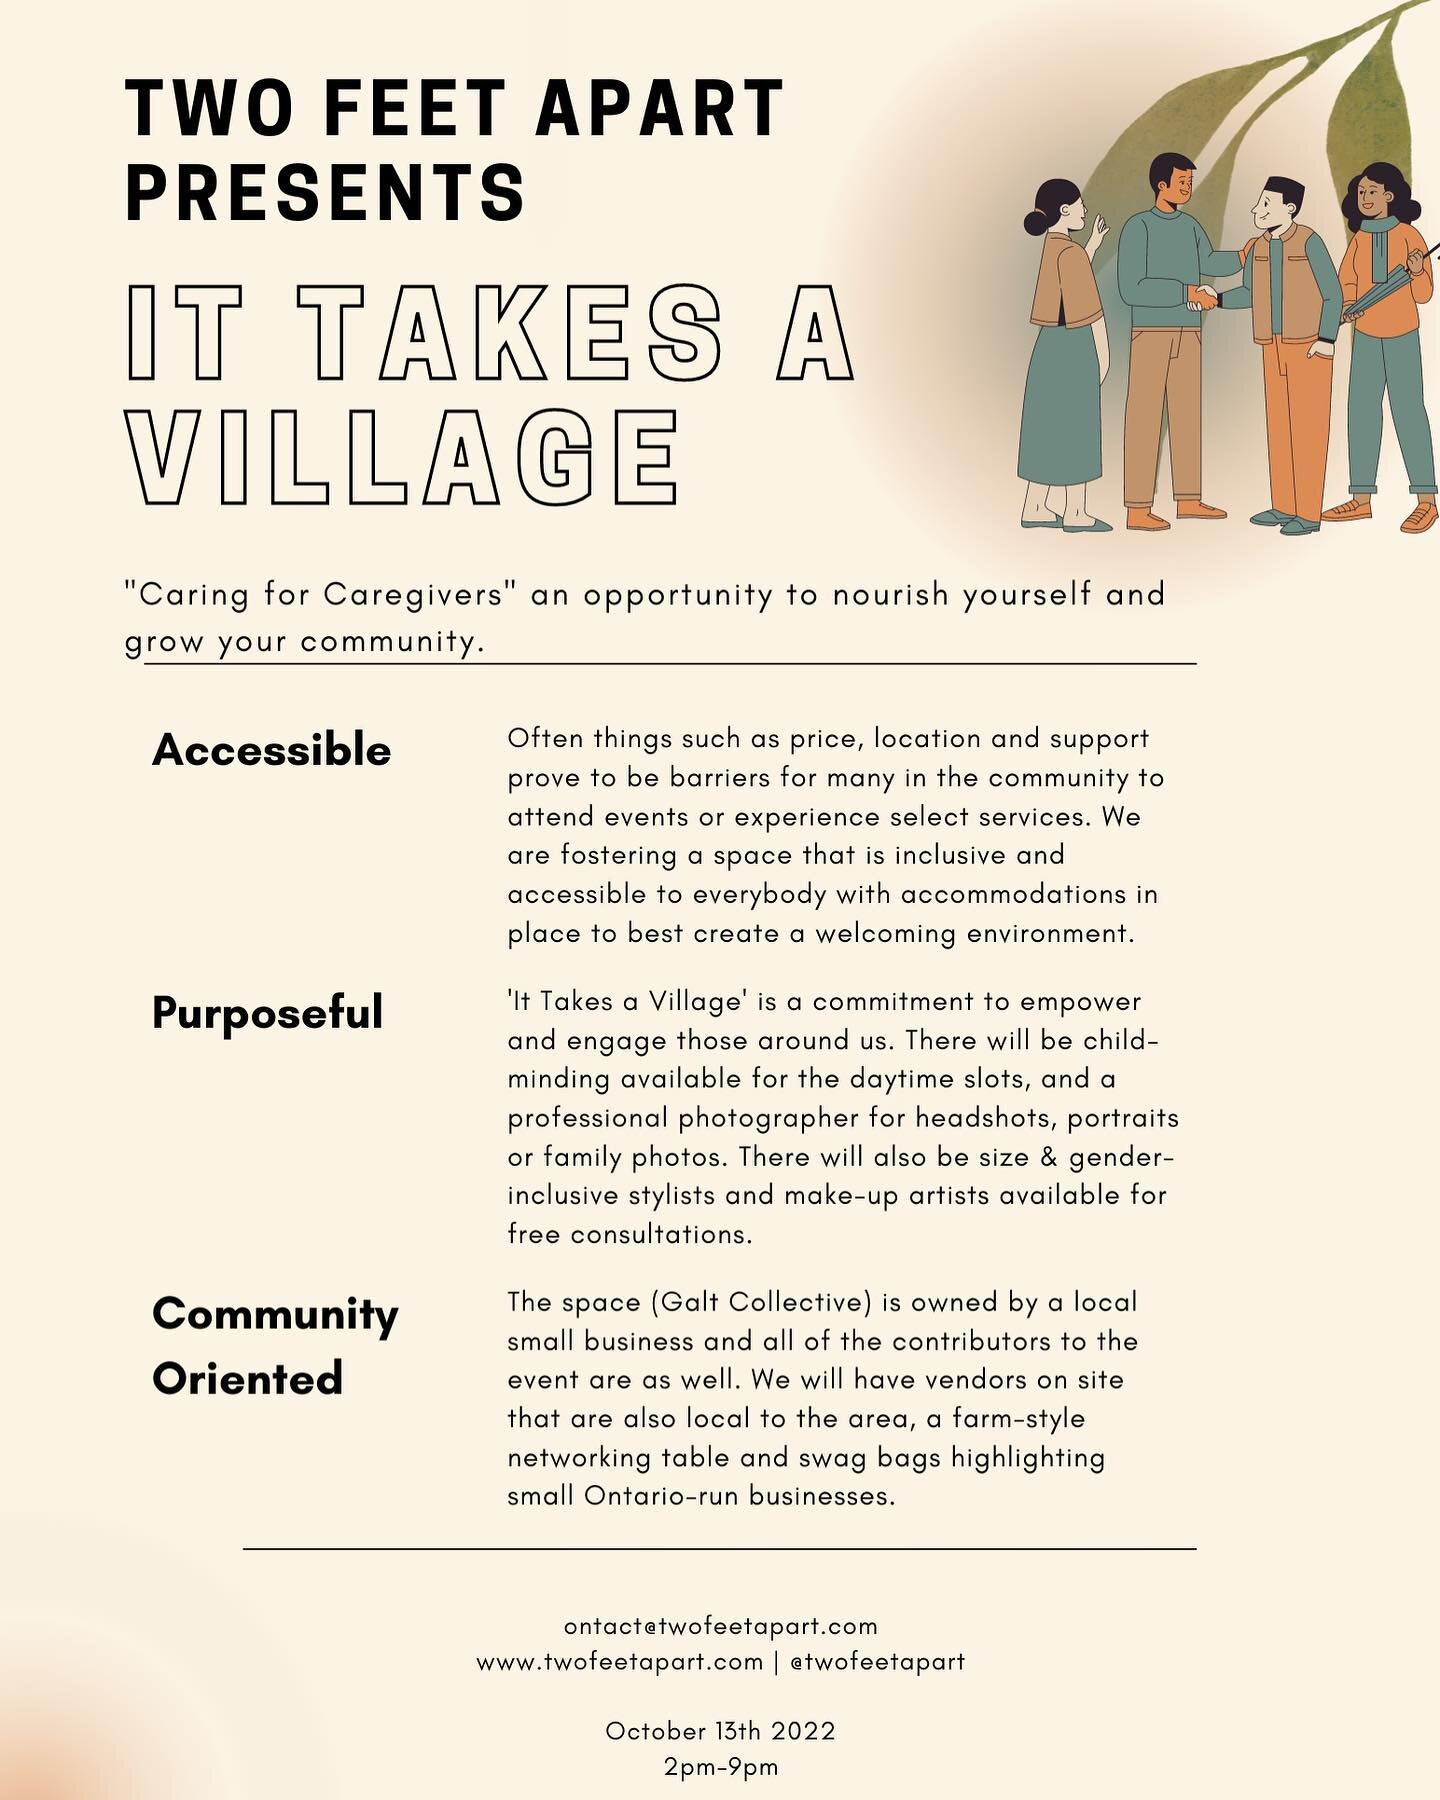 Two Feet Apart Presents: It Takes A Village 

&quot;Caring for Caregivers&quot; is an opportunity to nourish yourself and grow your community.

Accessible

Purposeful

Community-Oriented

Often things such as price, location and support prove to be b